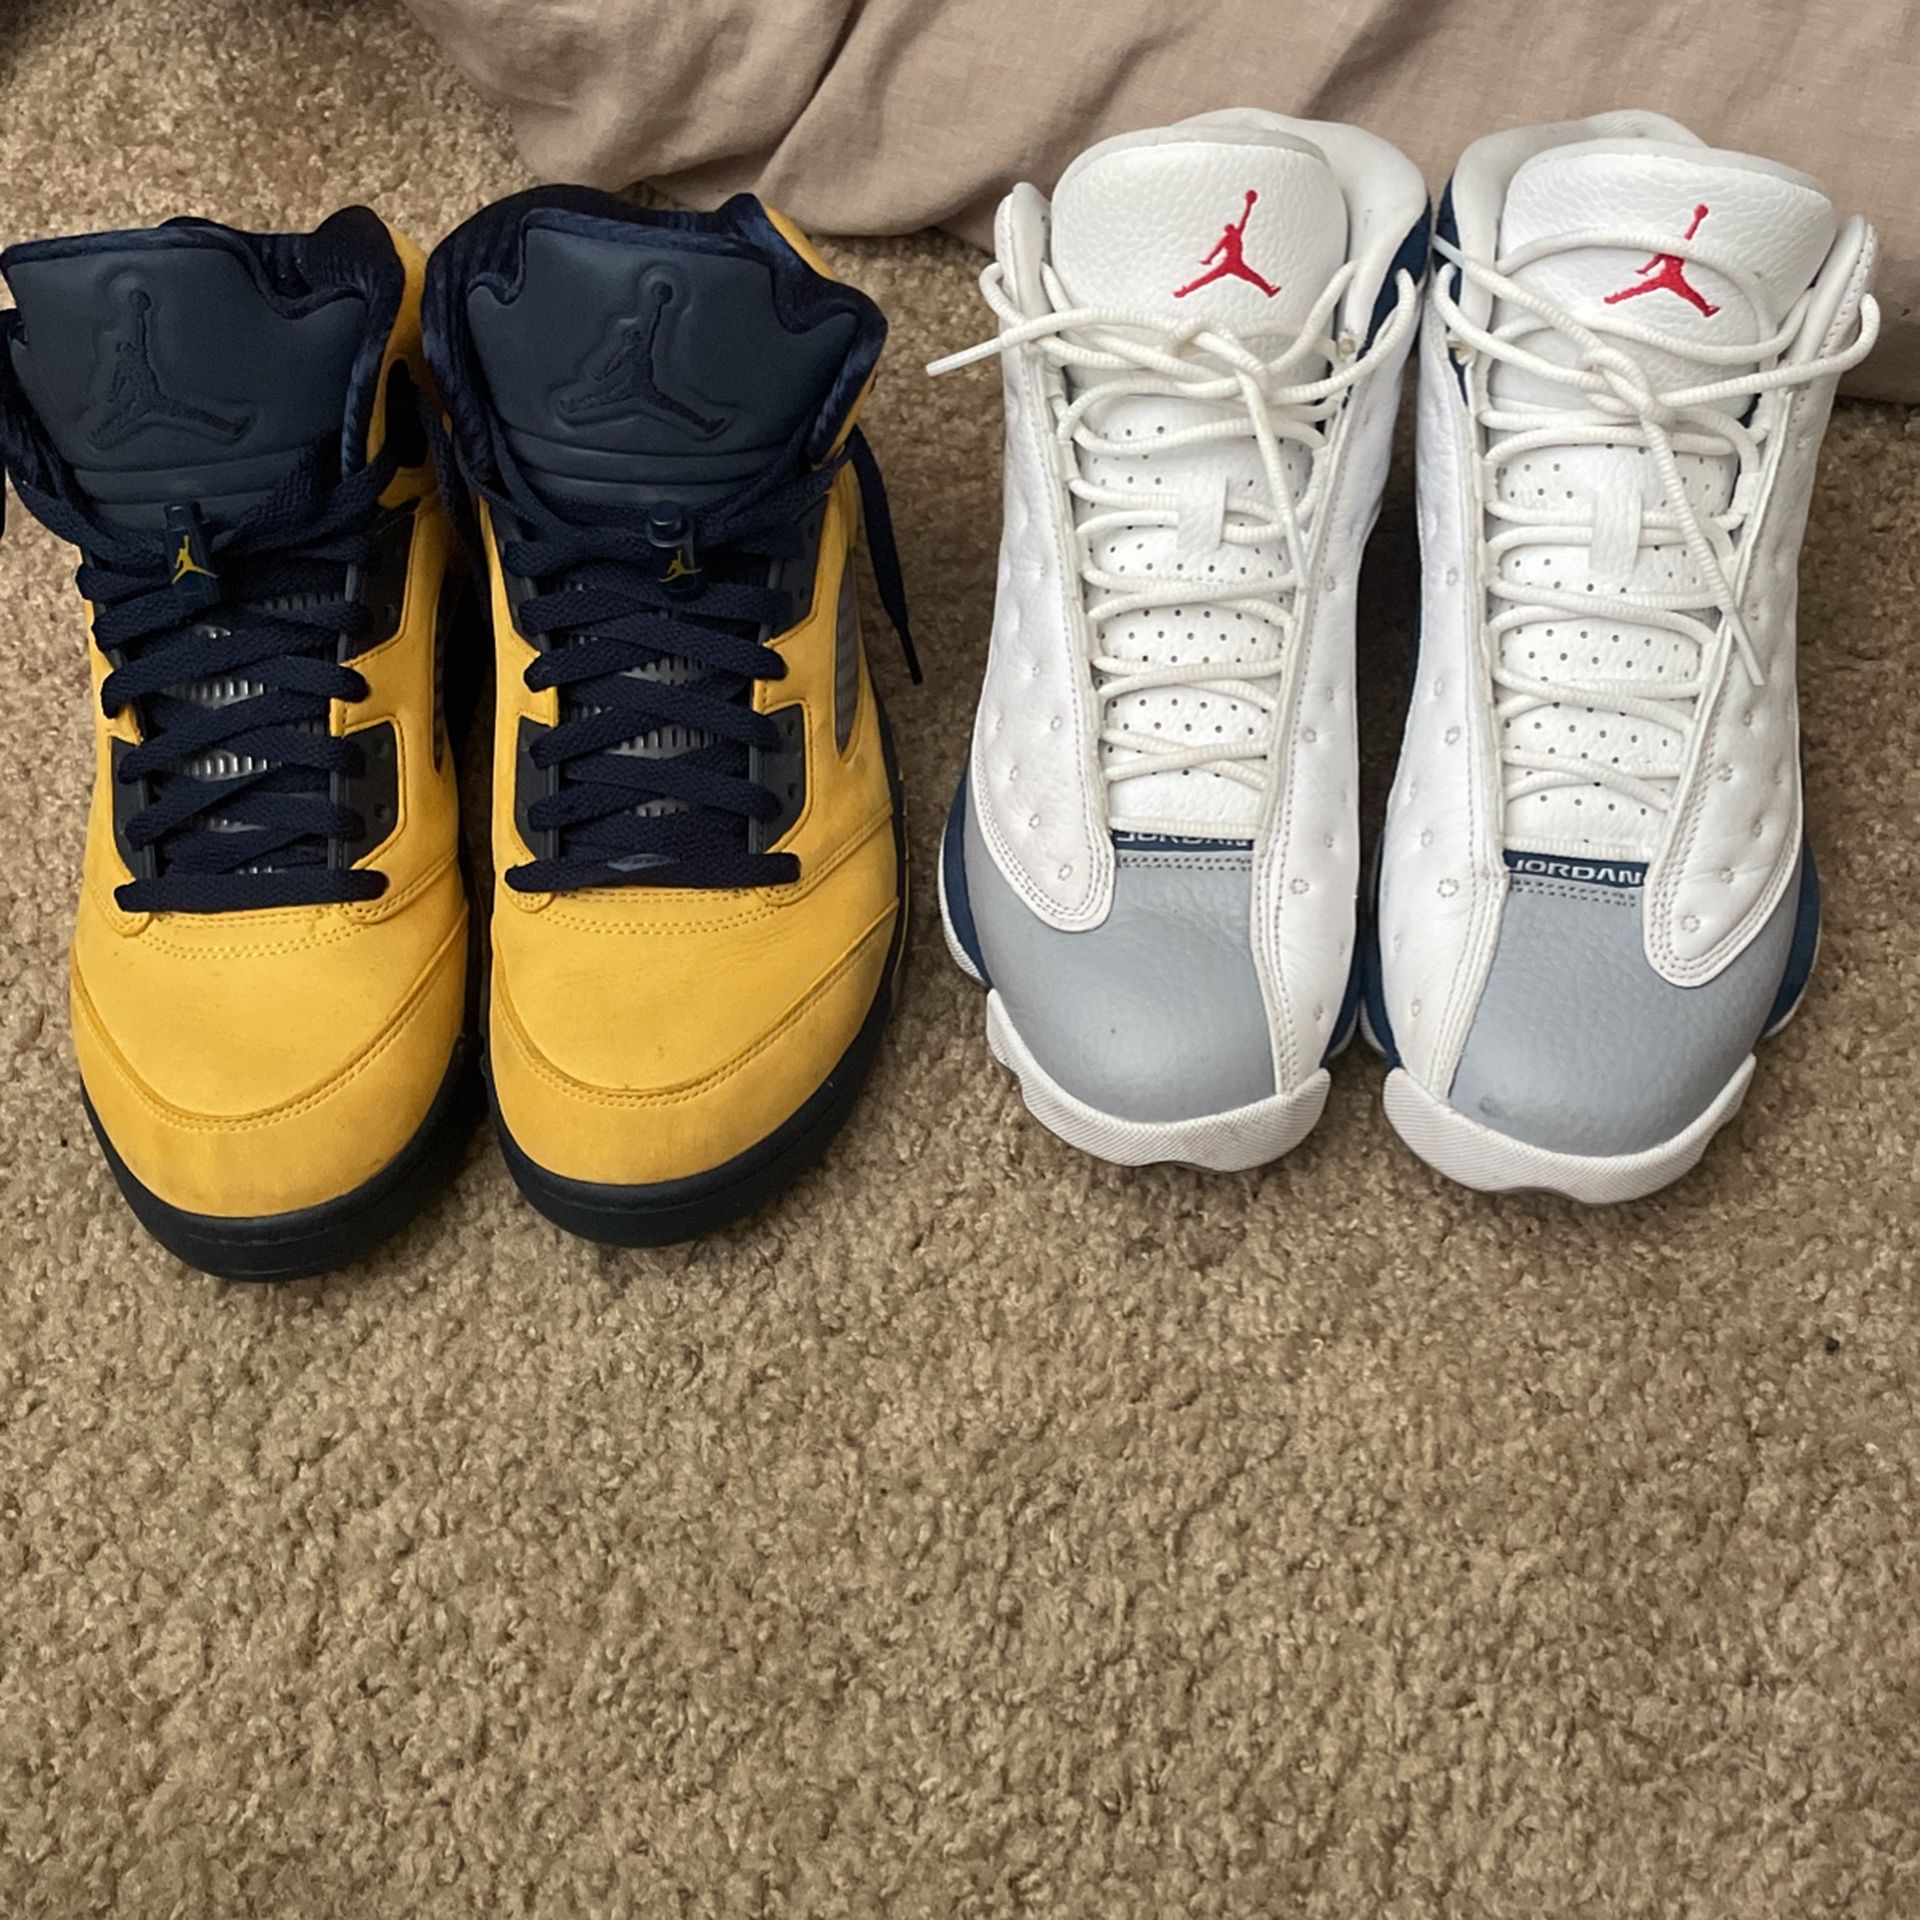 Jordan Michigan 5’s and French Blue 13’s